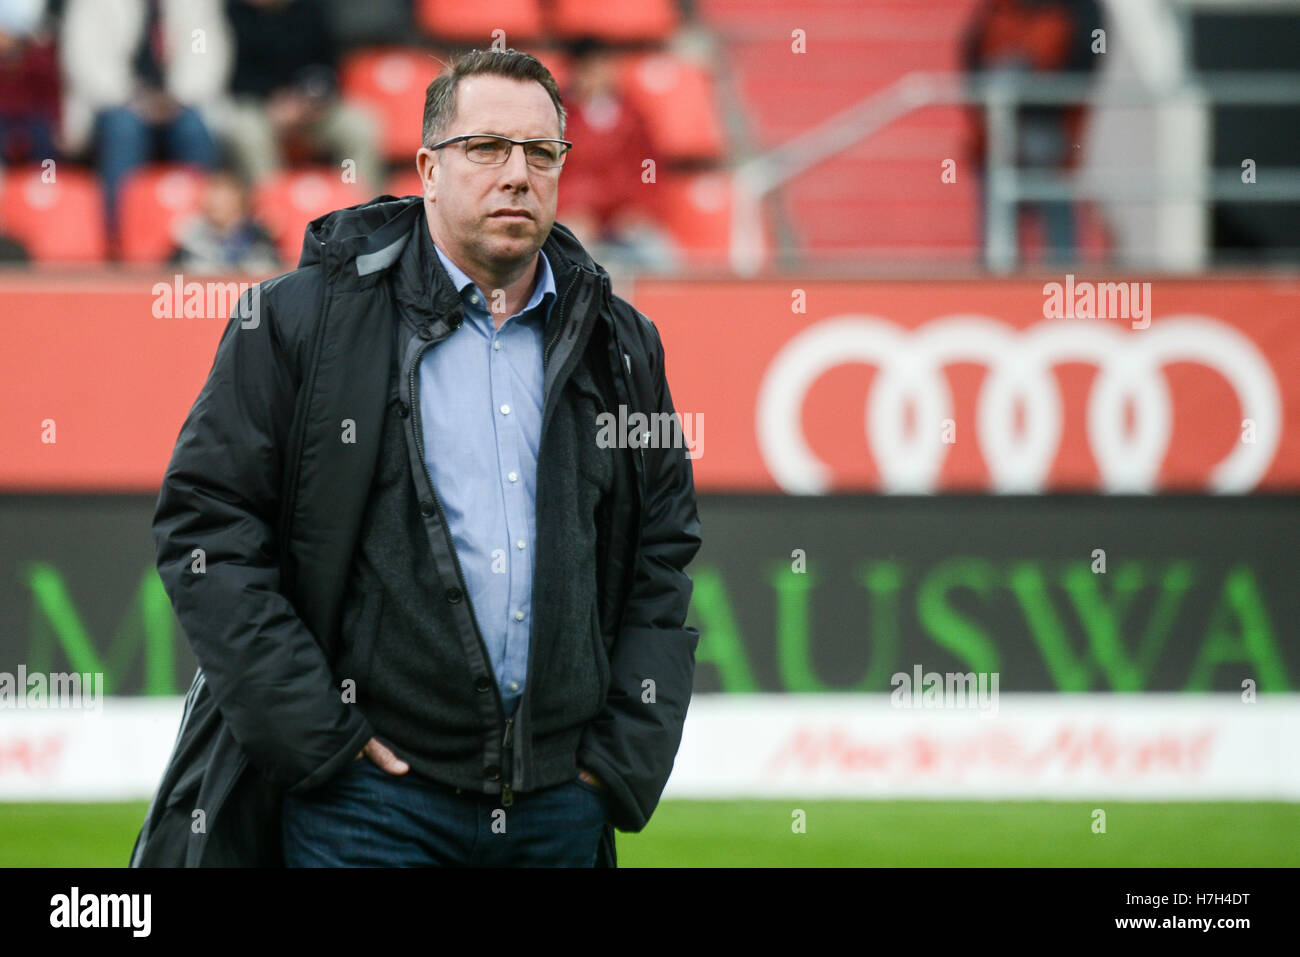 Ingolstadt, Germany. 5th Nov, 2016. Coach Markus Kauczinski of Ingolstadt stands in the stadium before the soccer match between FC Ingolstadt o4 and FC Augsburg on the tenth match day of the Bundesliga at Audi Sportpark in Ingolstadt, Germany, 5 November 2016. PHOTO: ARMIN WEIGEL/dpa (ATTENTION: Due to the accreditation guidelines, the DFL only permits the publication and utilisation of up to 15 pictures per match on the internet and in online media during the match.) Credit:  dpa/Alamy Live News Stock Photo